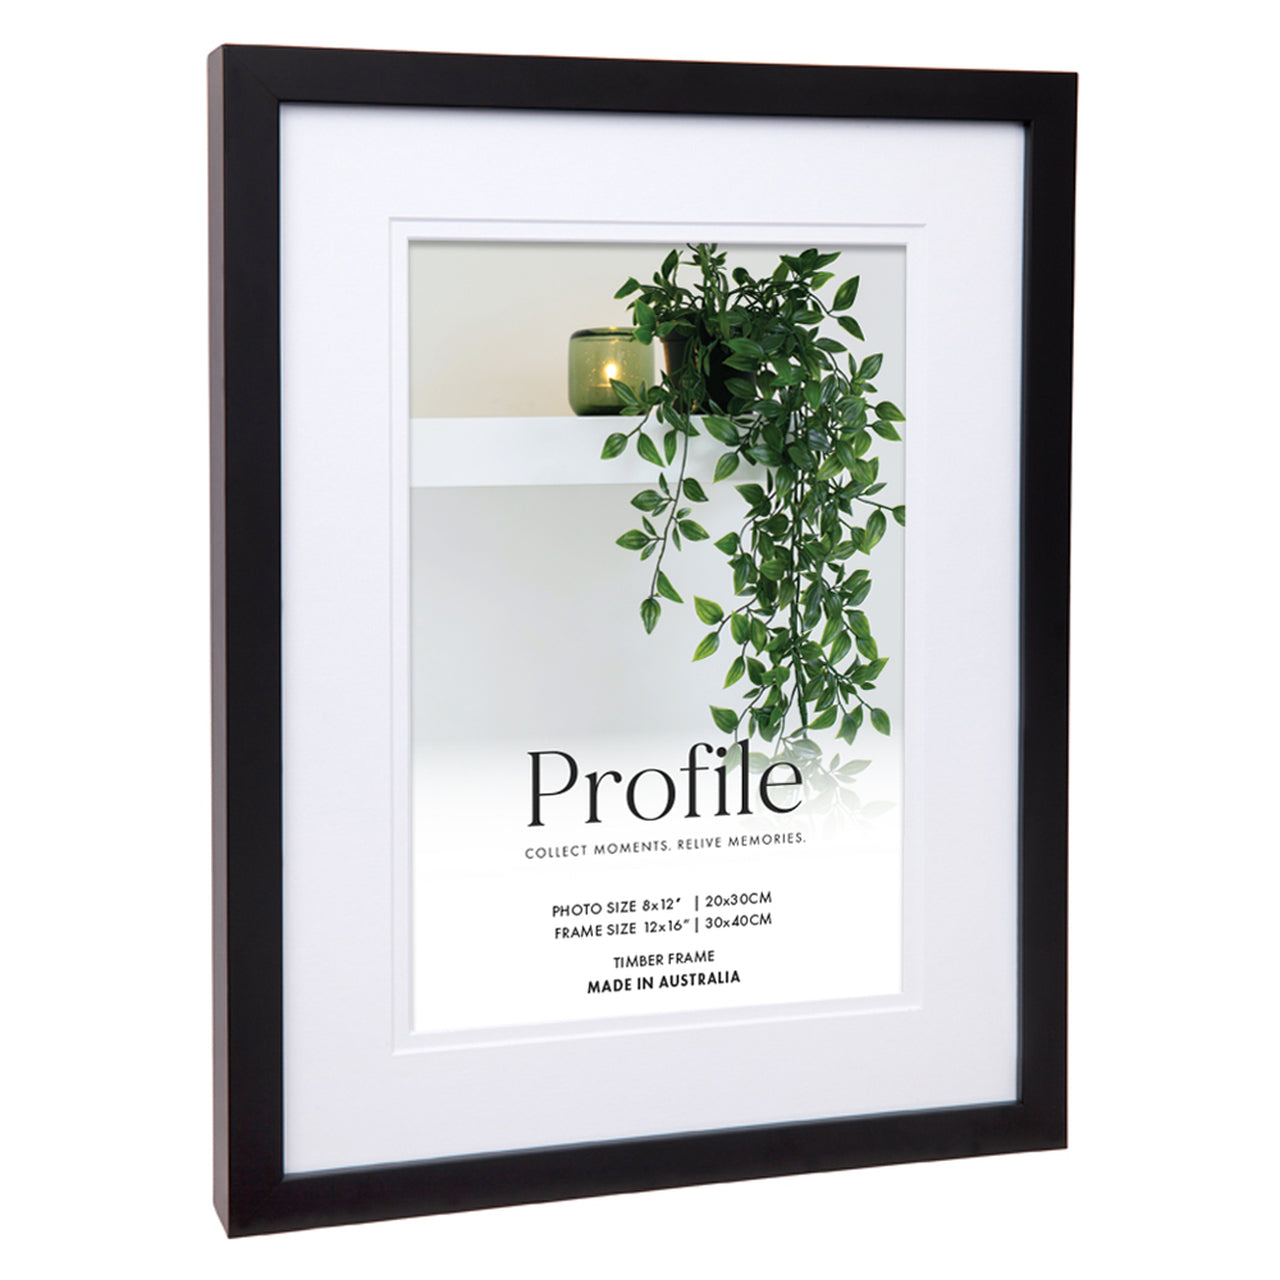 Deluxe Black 6x8 Photo Frame with 4x6 opening